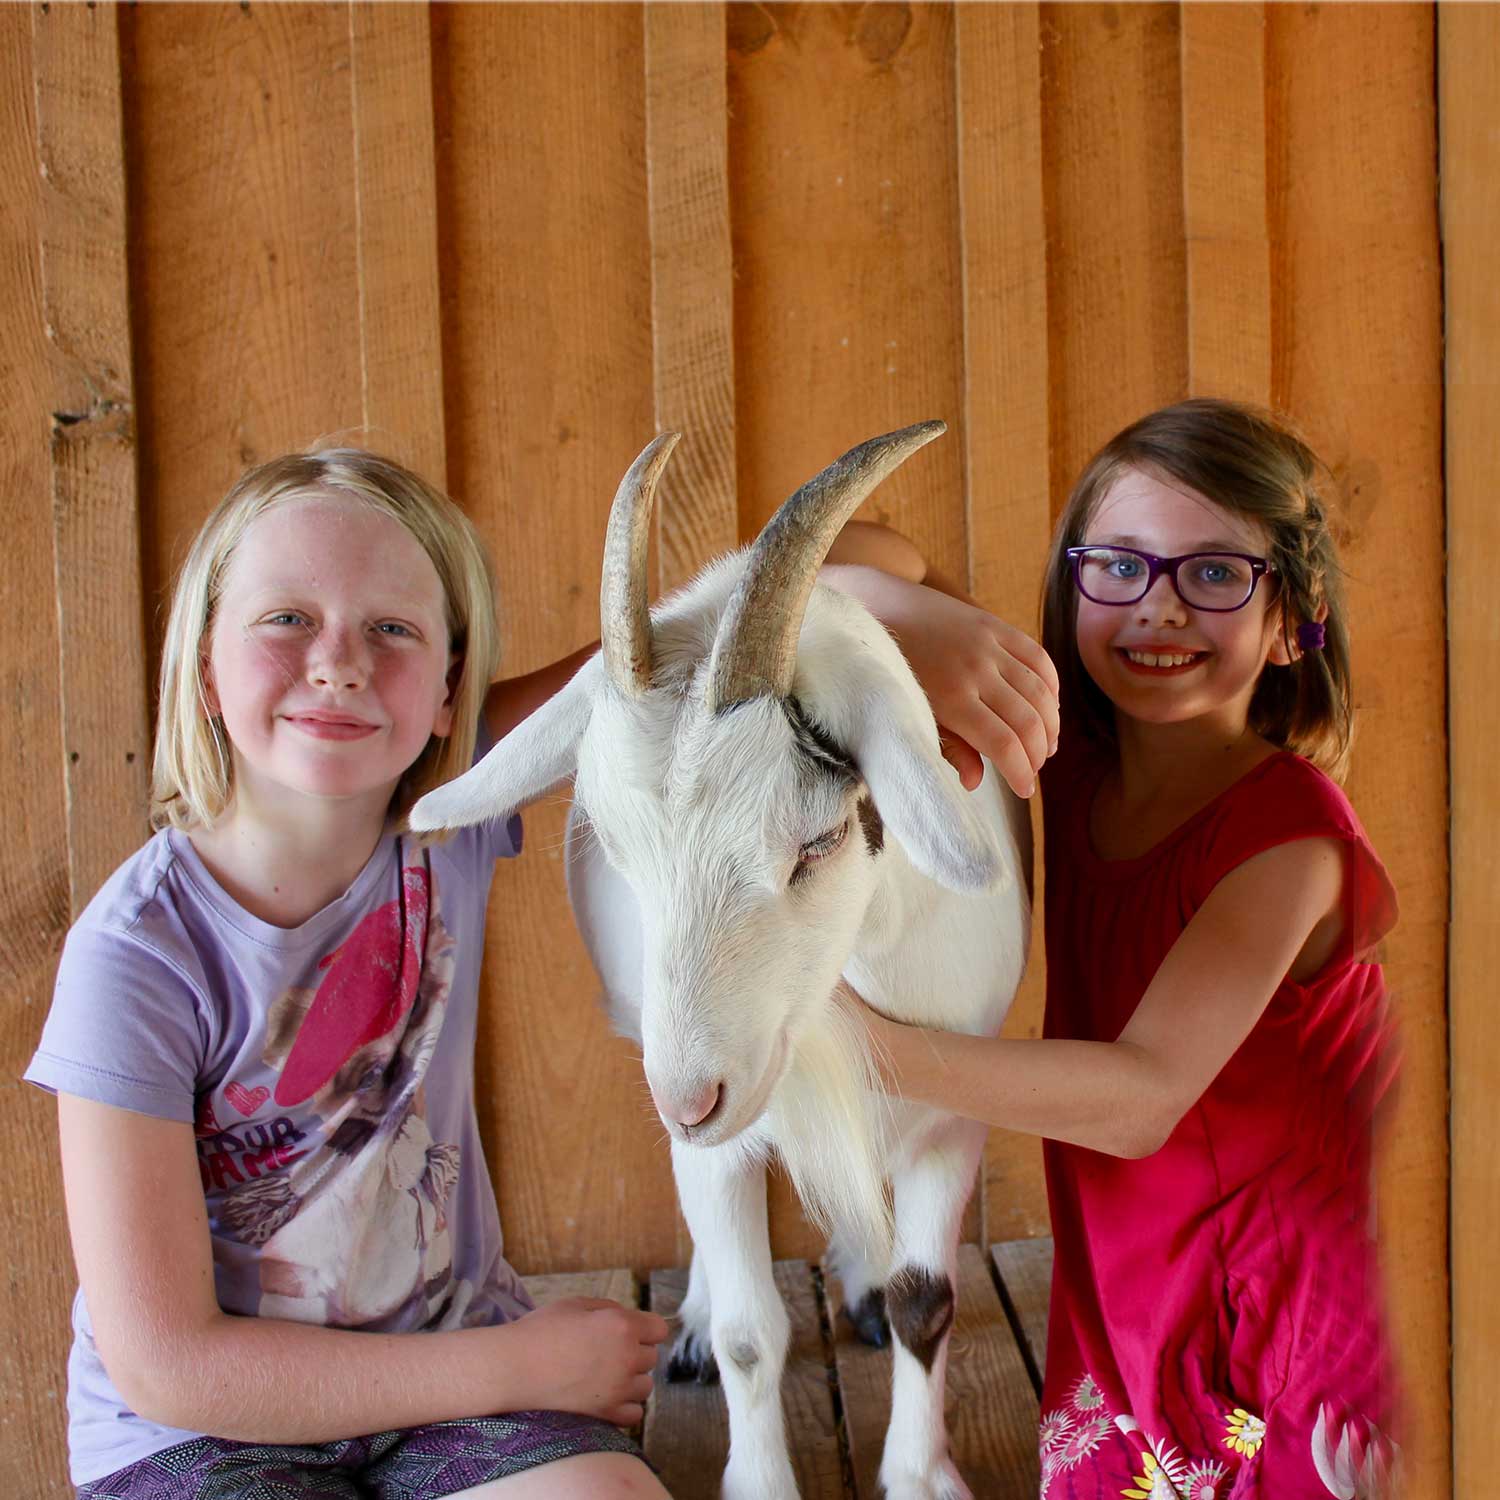 Two girls pose in a barn with a goat